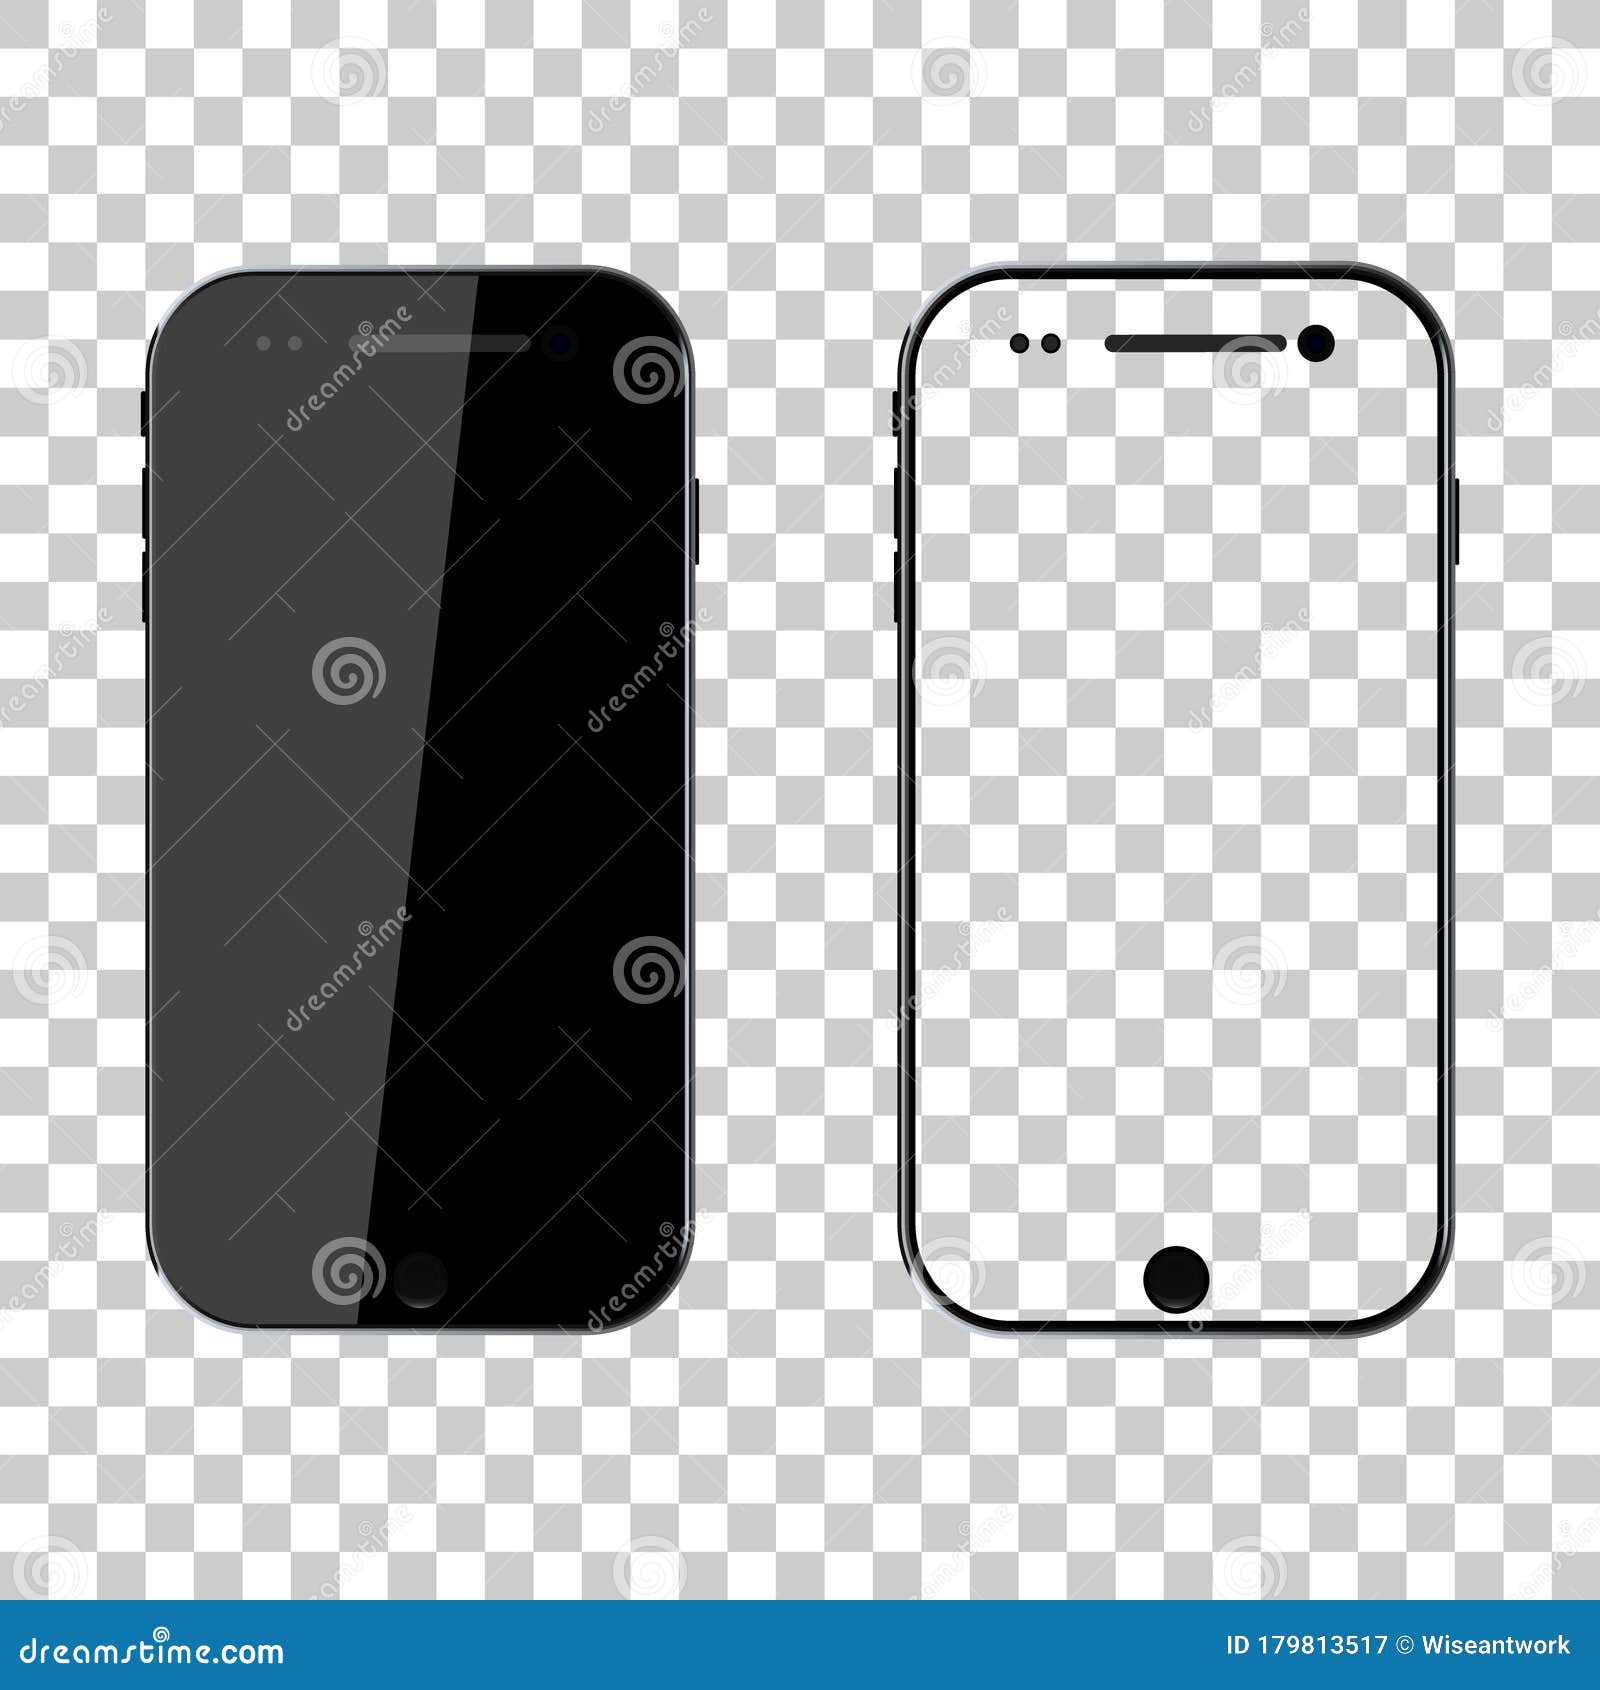 Png Mockup Phone Mock Up Black Smartphone Mobile Cellphone With Blank Screen Isolated On Transparent Background Template And Stock Illustration Illustration Of Identity Frame